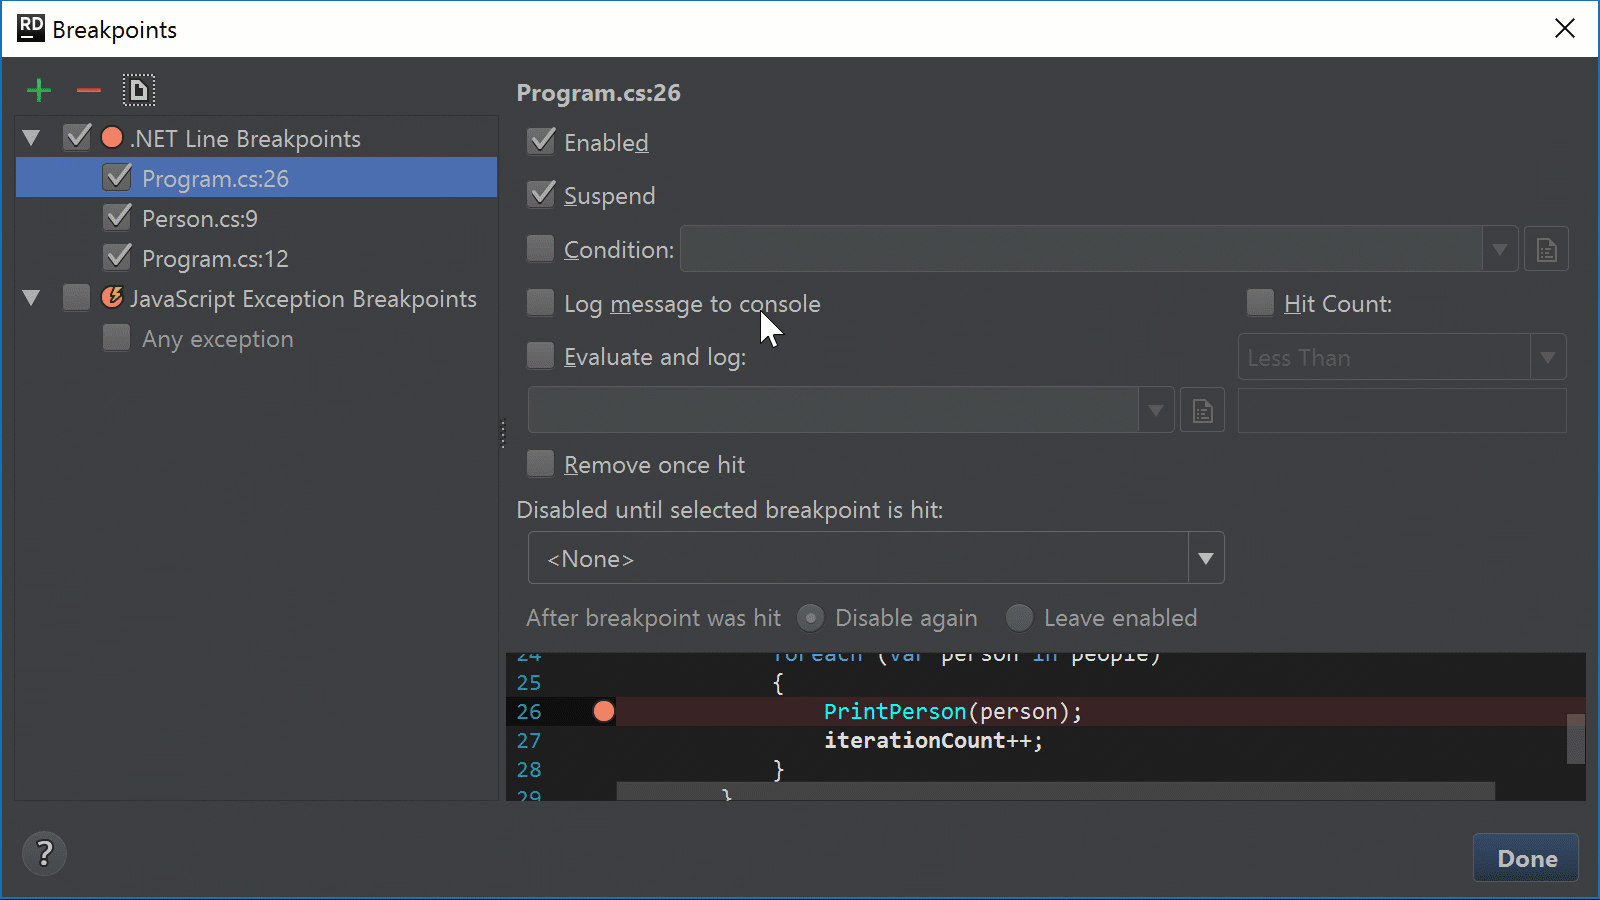 Set conditional breakpoint in the editor